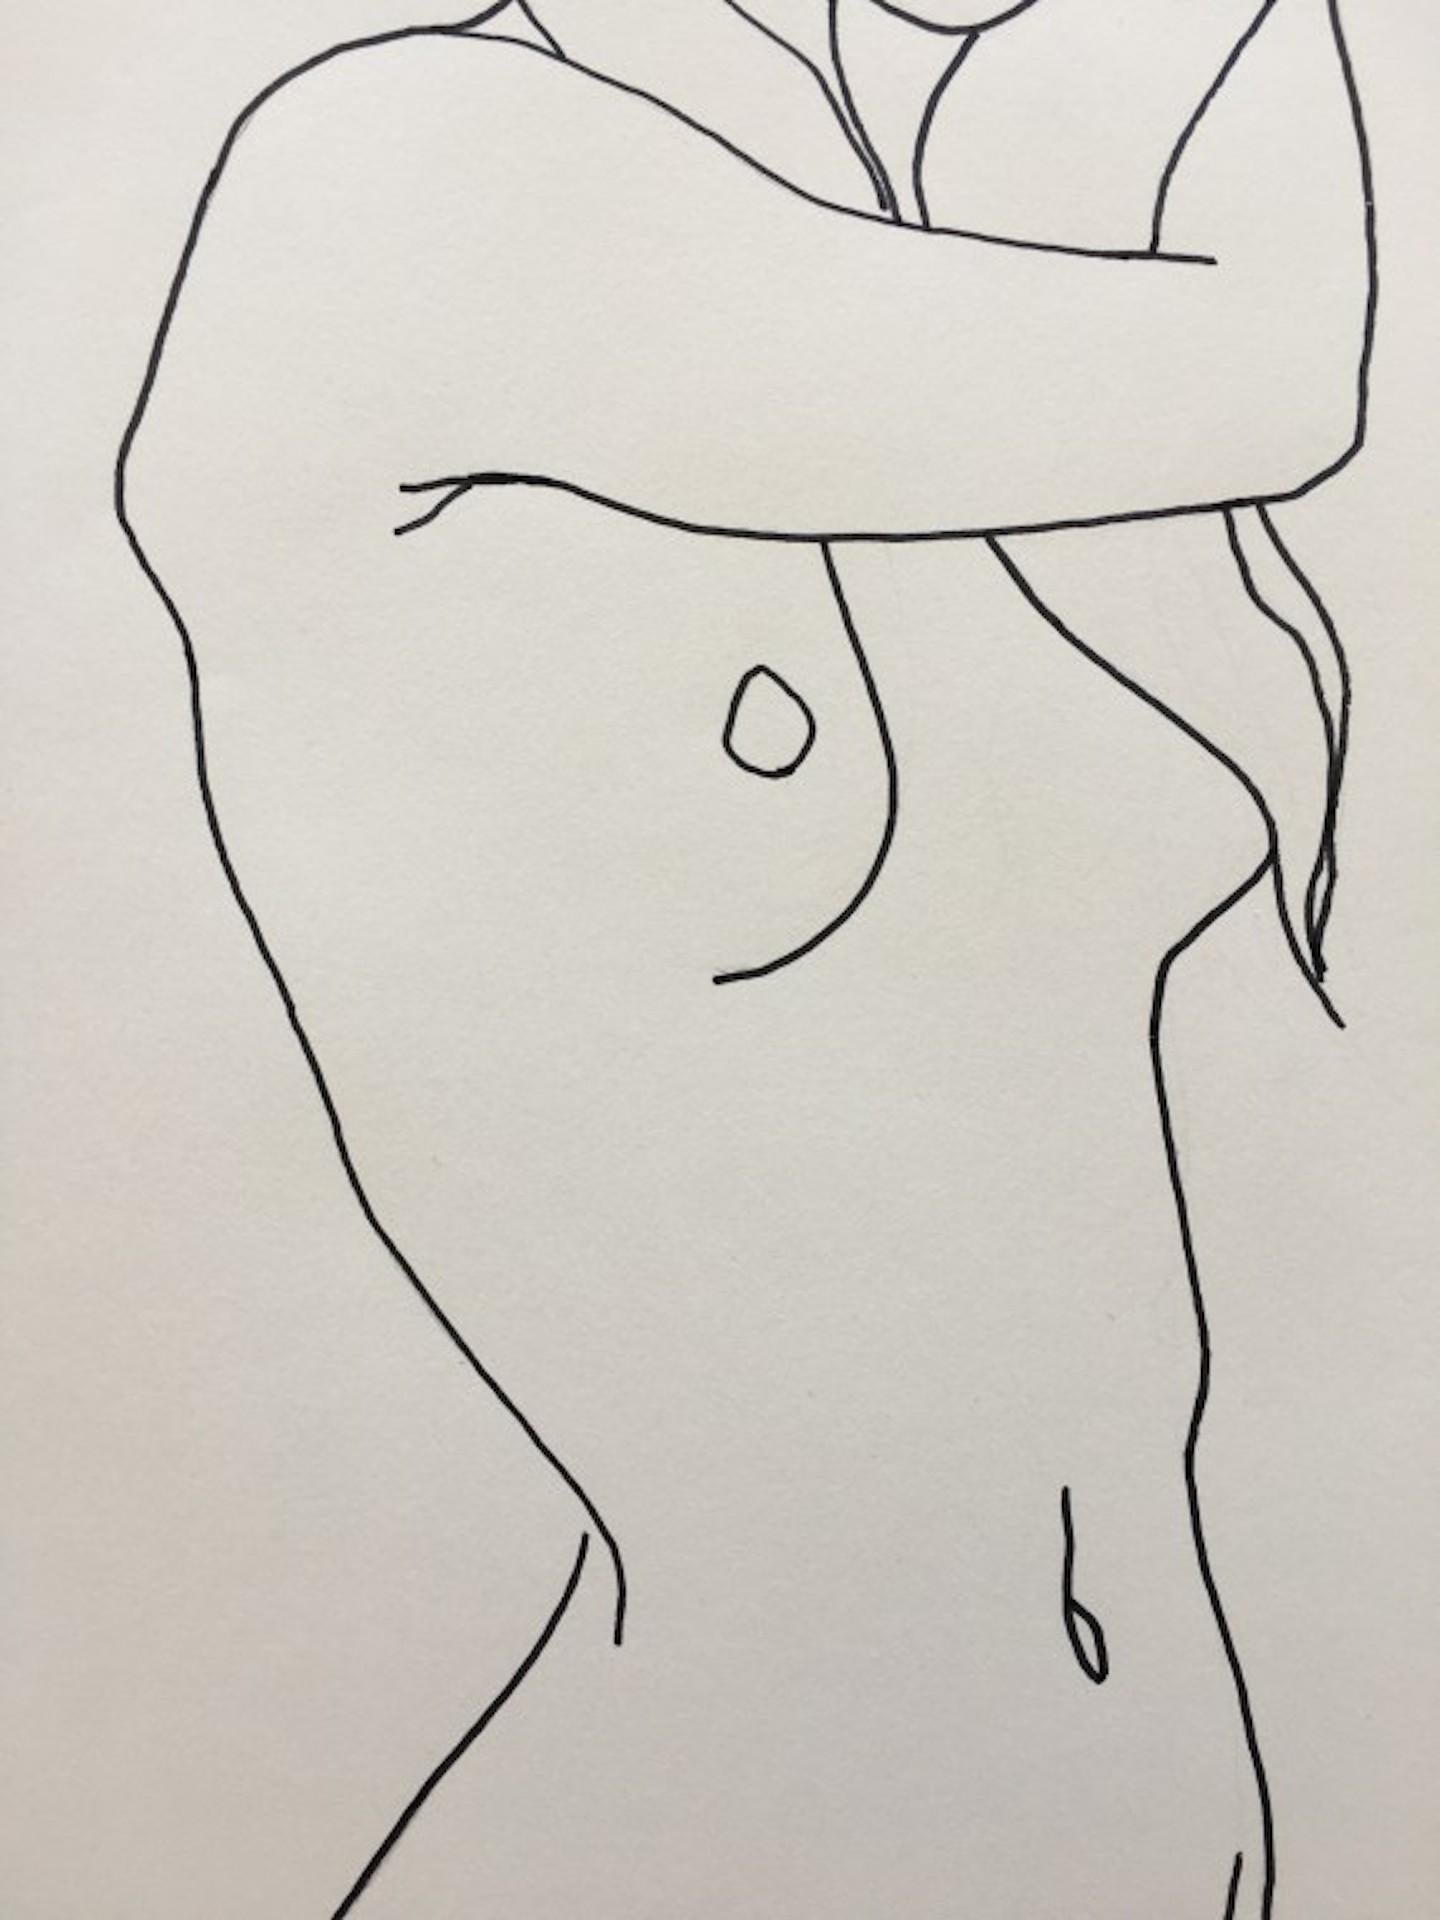 Nude 2 [2021]
Original
Nudes and Erotic
Black Ink Pen on Cartridge Paper
Size: H:42 cm x W:29 cm x D:0.01cm
Sold Unframed
Please note that insitu images are purely an indication of how a piece may look

Nude 2 is an original drawing by artist Ellen